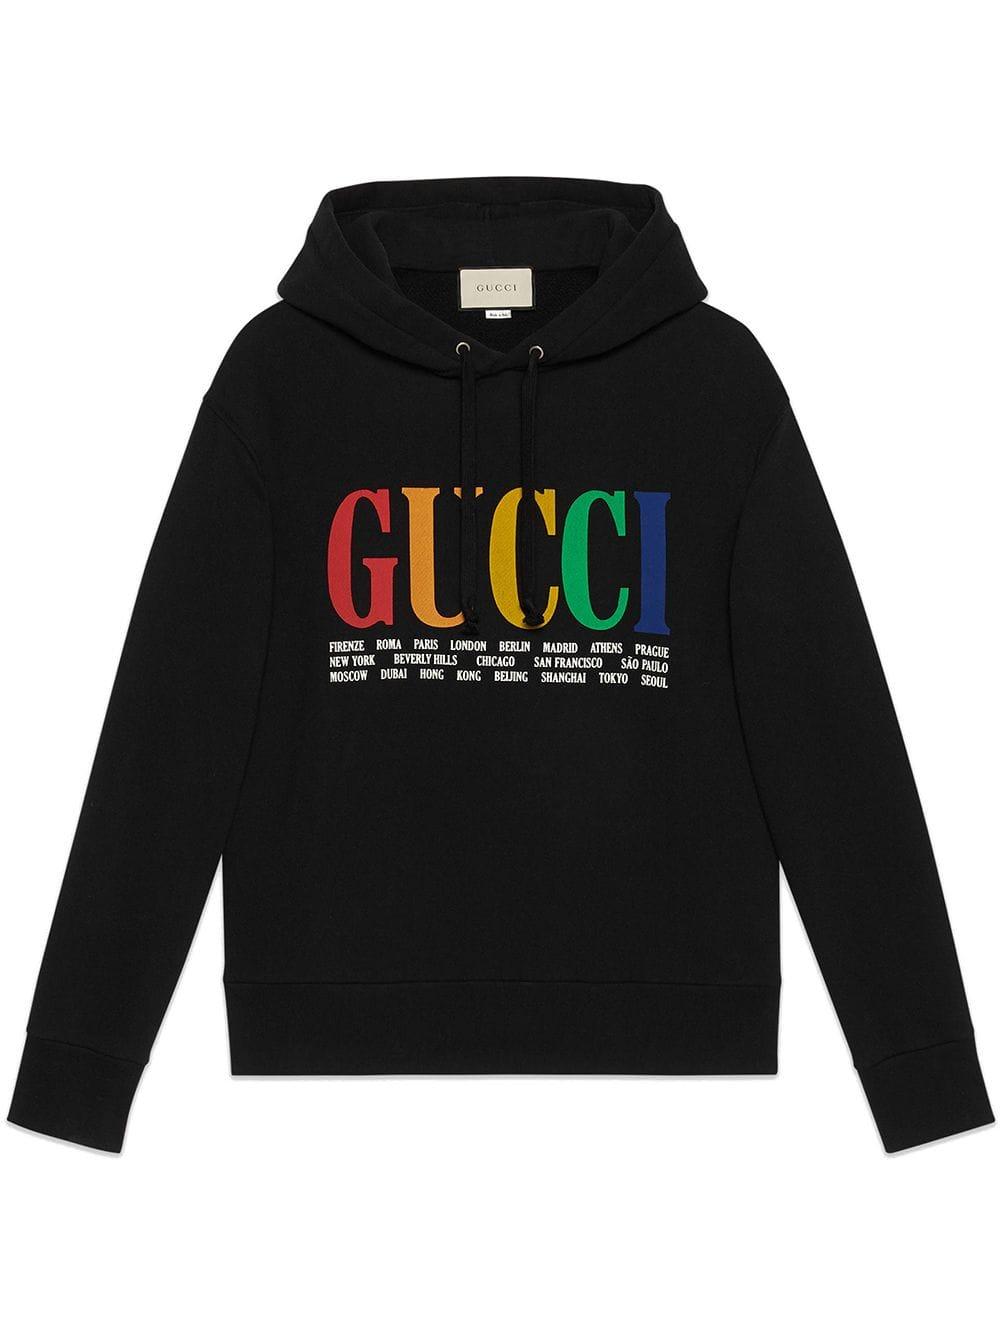 Gucci cities felted cotton sweatshirt in grey